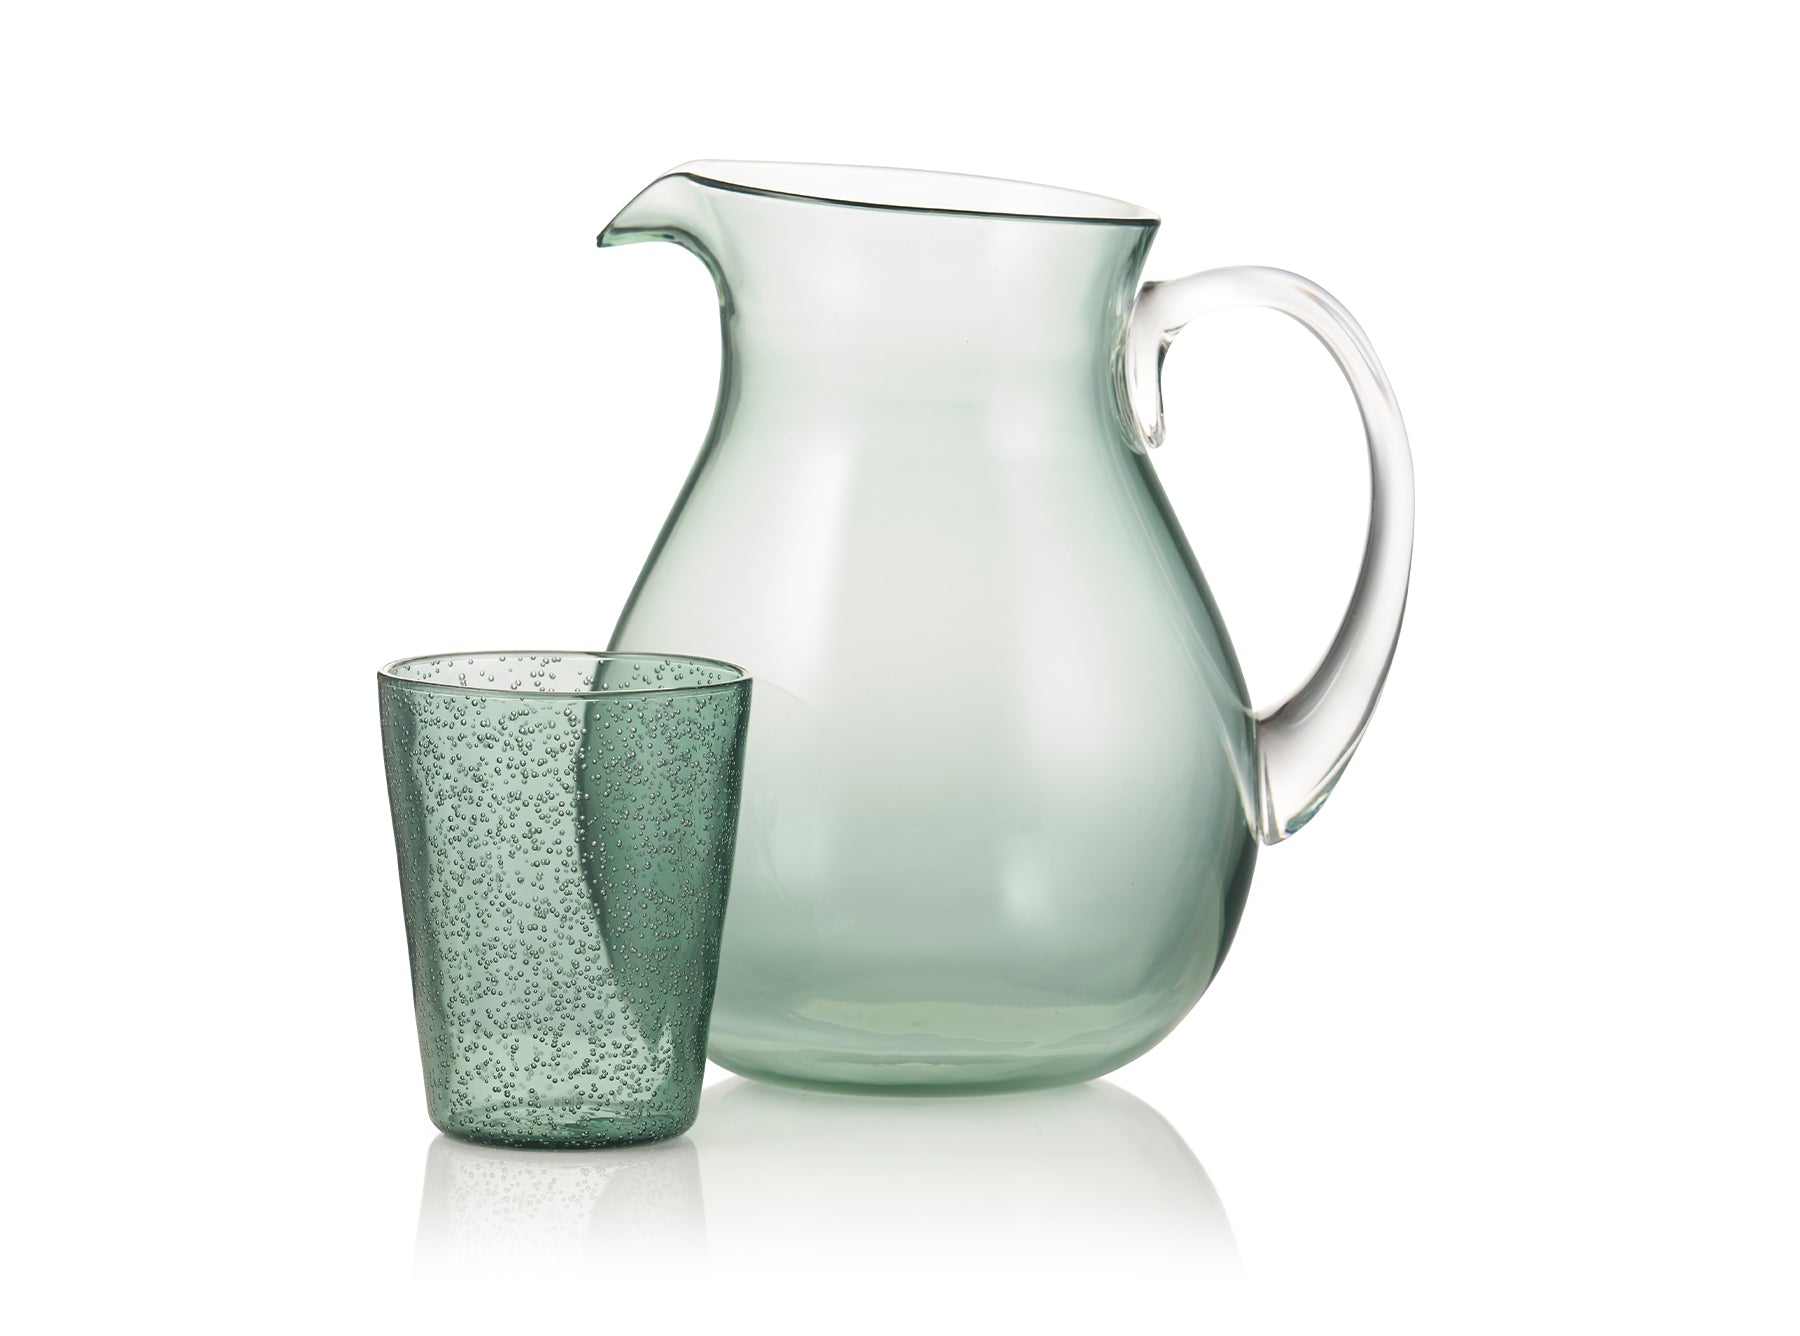 Recyclable Plastic Bobby Pitcher in Teal Blue